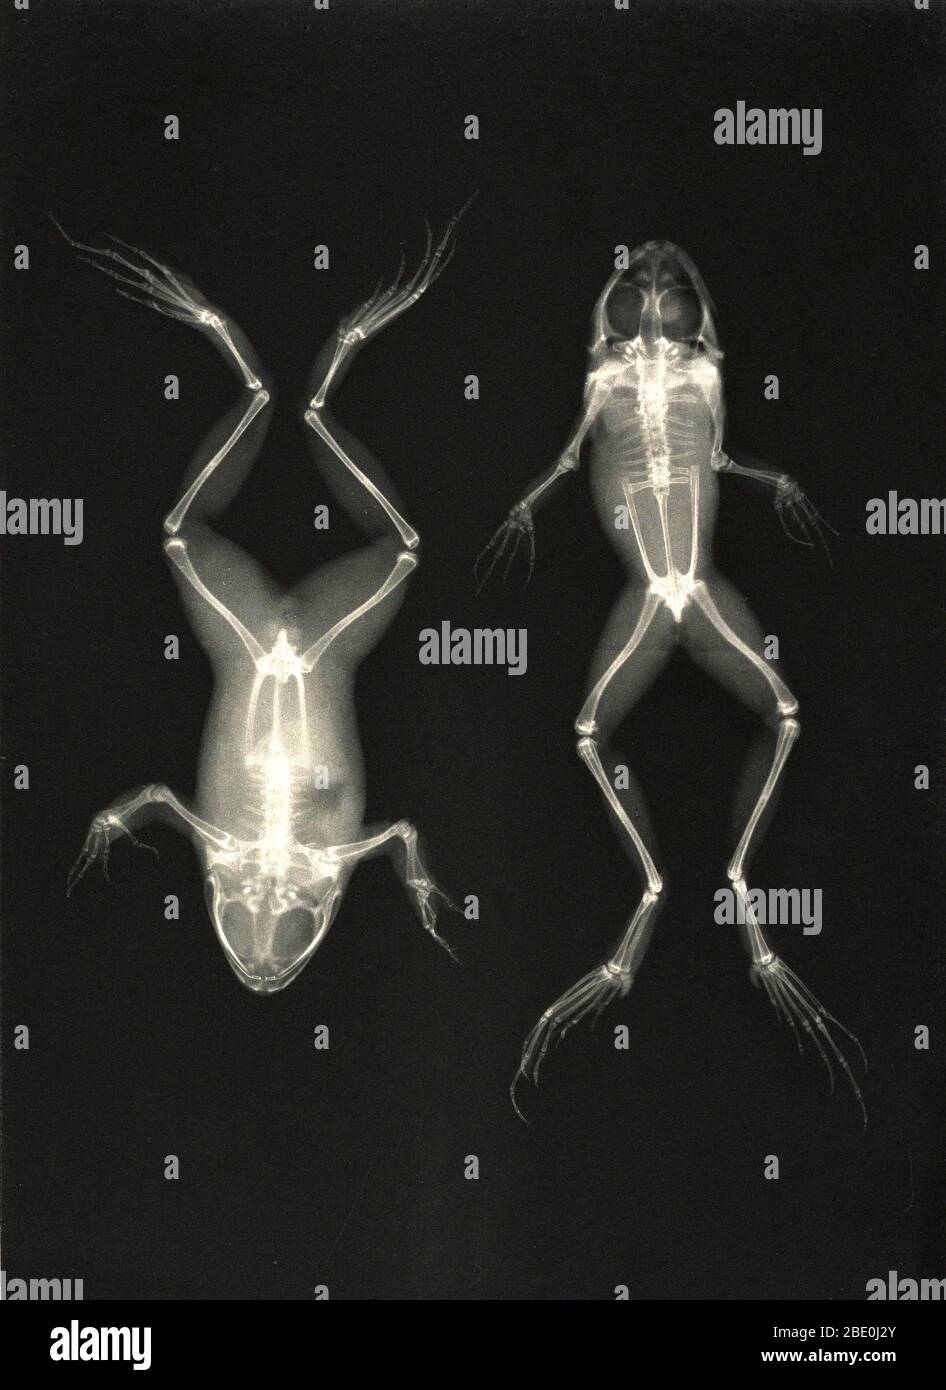 Historical X-ray of the abdomen and back of two frogs, 1896. Taken by Josef Maria Eder (Austrian, 1855-1944) and Eduard Valenta (Austrian, 1857-1937). Photogravure. Eder was the director of an institute for graphic processes and the author of an early history of photography. With the photochemist Valenta, he produced a portfolio in January 1896, less than a month after Wilhelm Conrad Rontgen published his discovery of X-rays. Eder and Valenta's volume, from which this plate derives, demonstrated the X-ray's magical ability to reveal the hidden structure of living things. Human hands and feet, Stock Photo